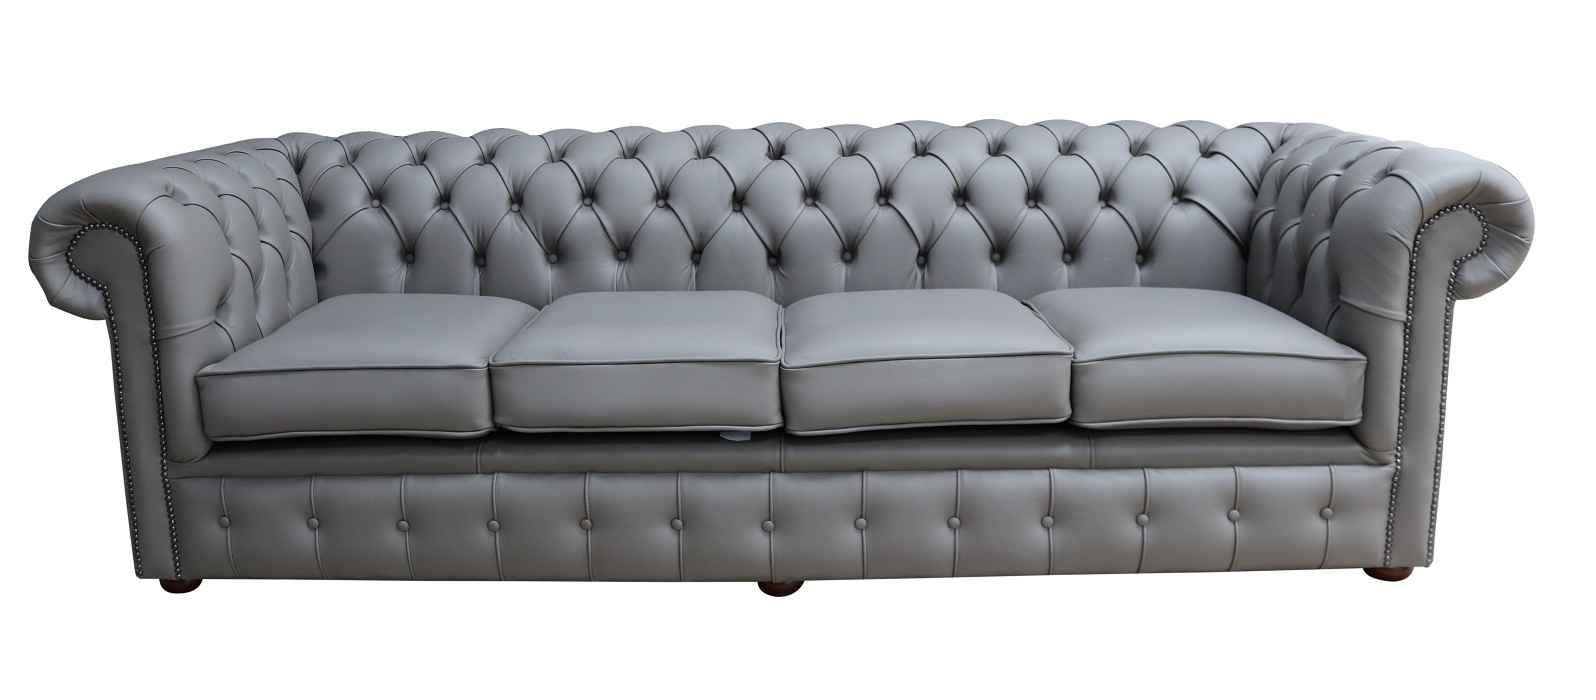 Elevate Your Living Room with a Cozy Grey Chesterfield Sofa from England  %Post Title